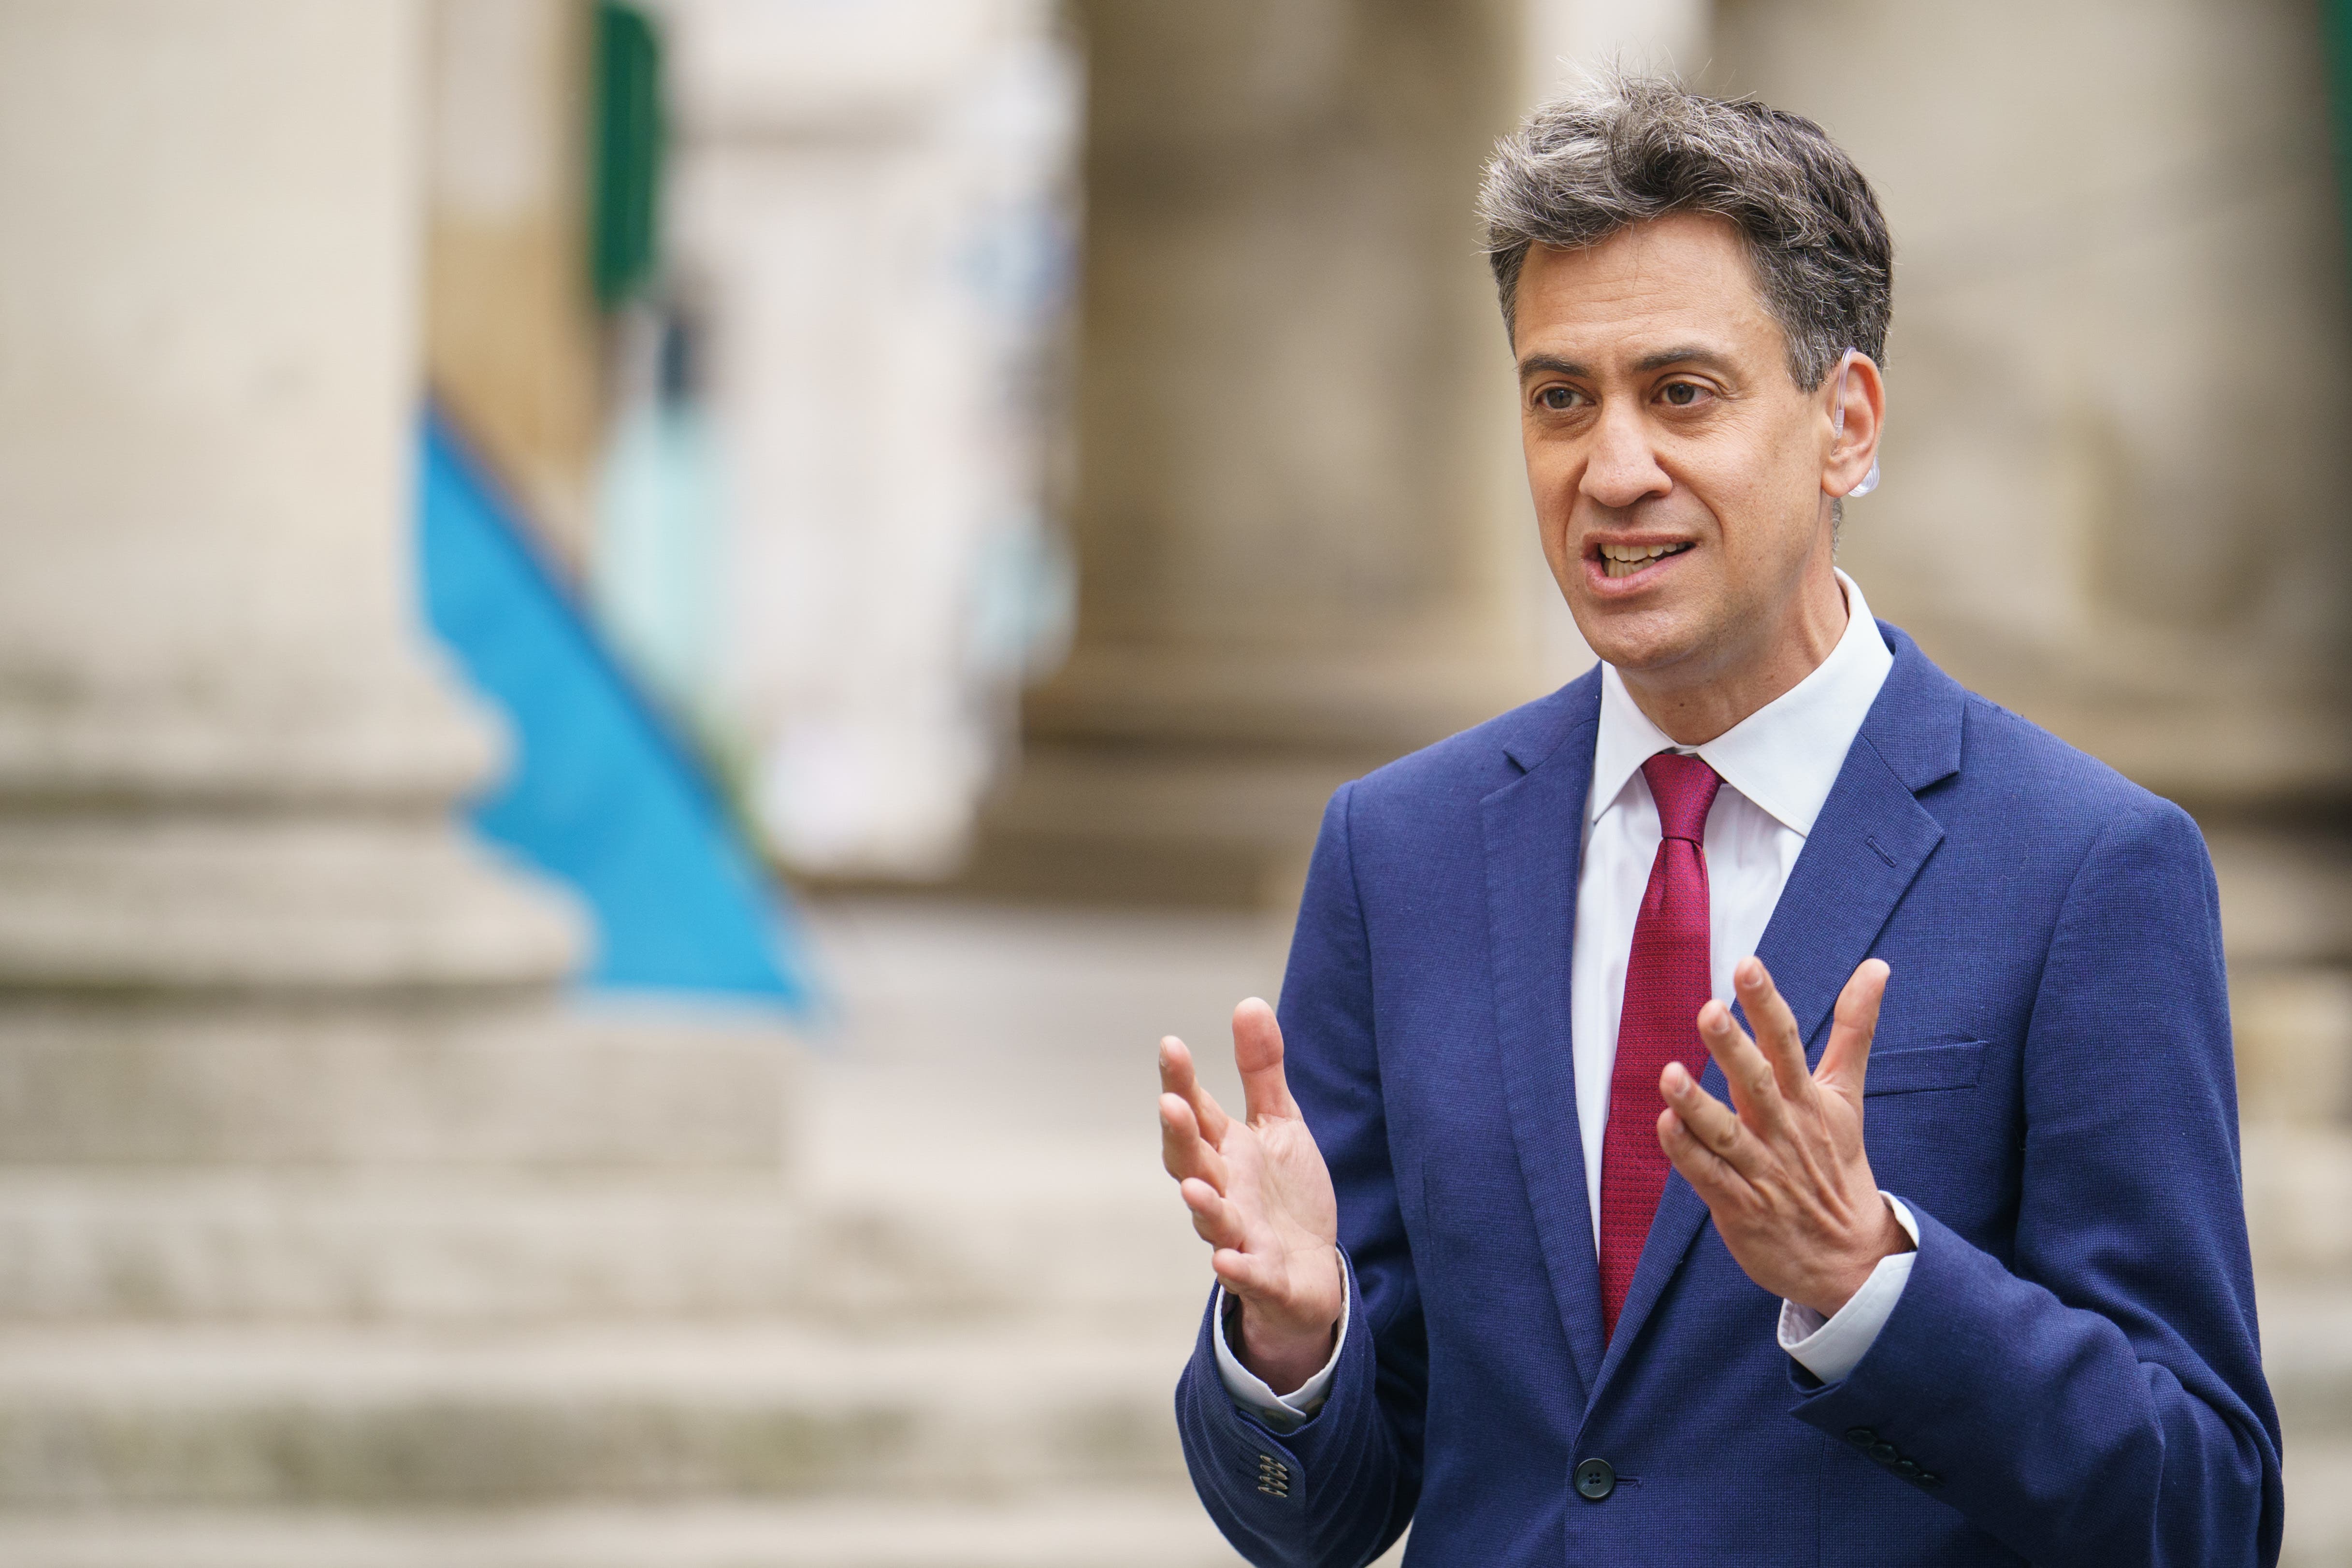 Ed Miliband said ministers were warned that no new offshore wind was on the way